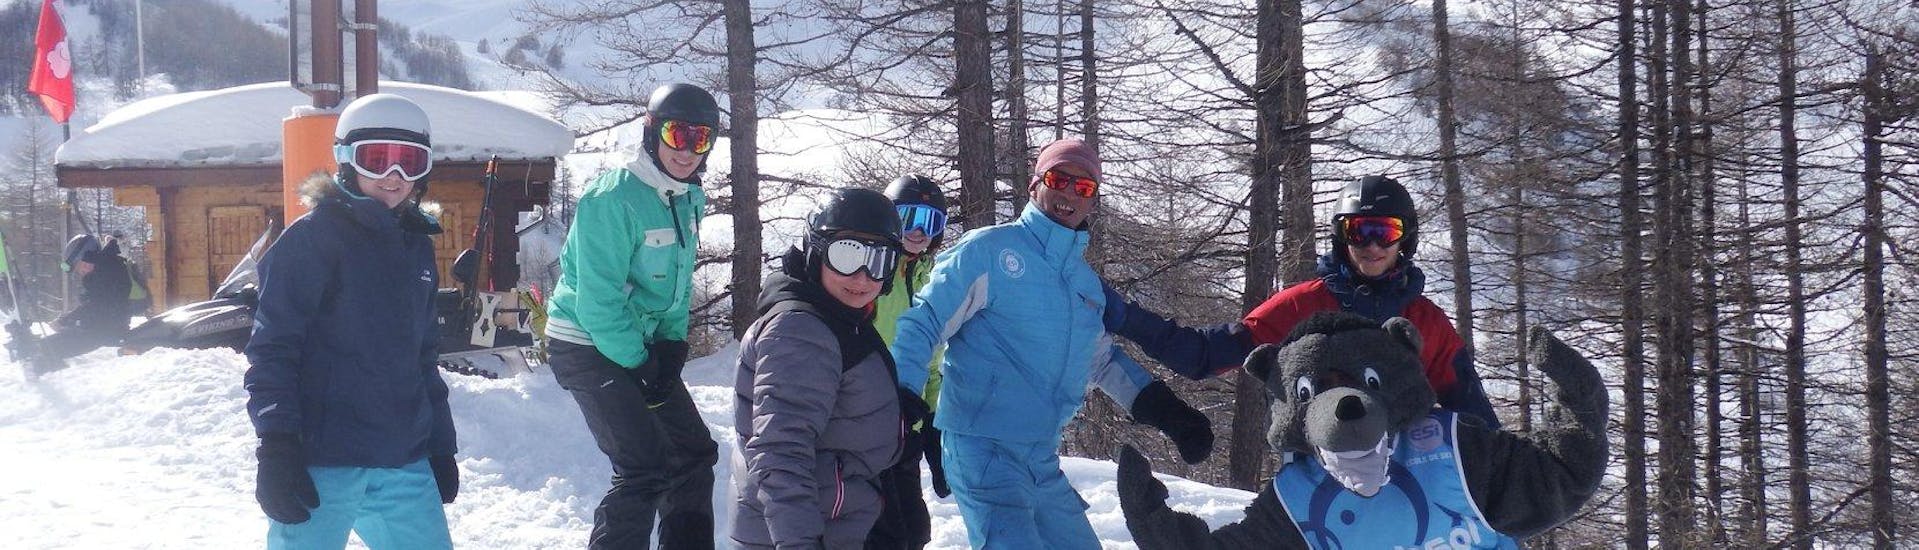 Snowboarding Lessons (from 10 y.) with Ski School ESI Pra Loup - Hero image